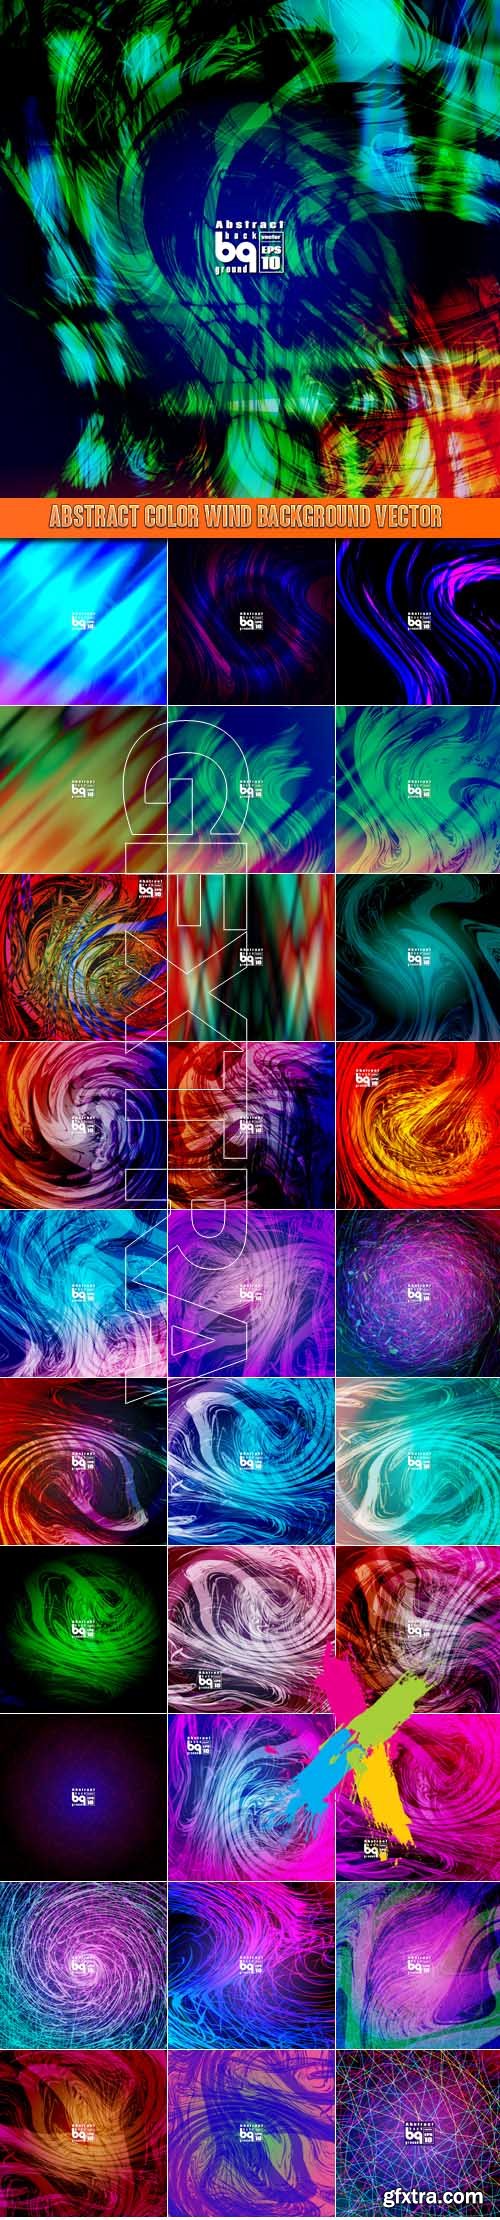 Abstract color wind background vector